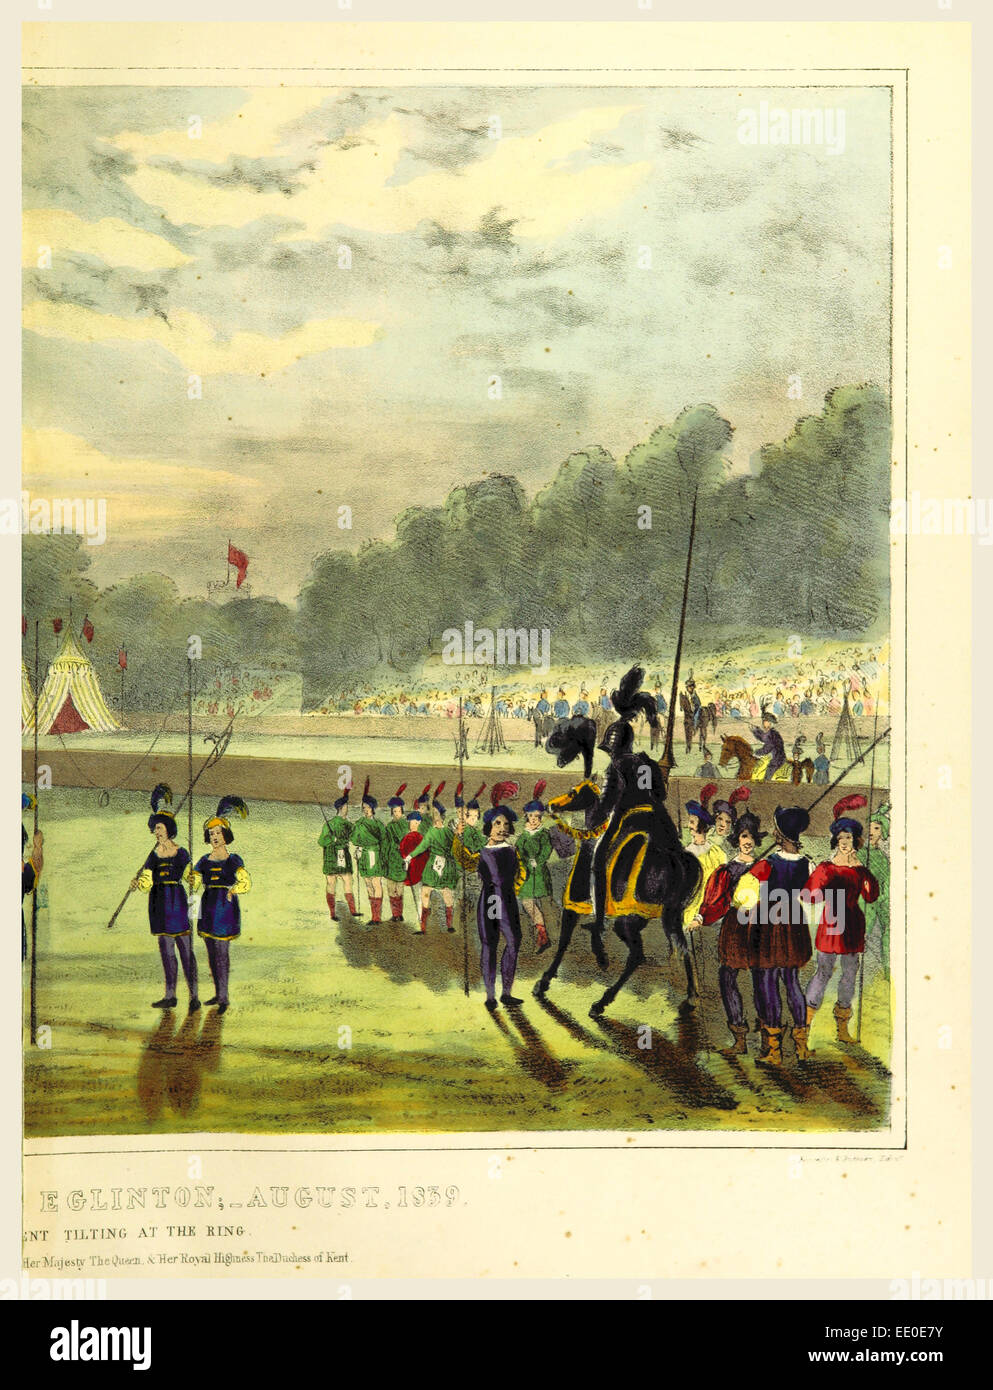 An Account of the Tournament at Eglinton, revised and corrected by several of the Knights, 19th century engraving Stock Photo